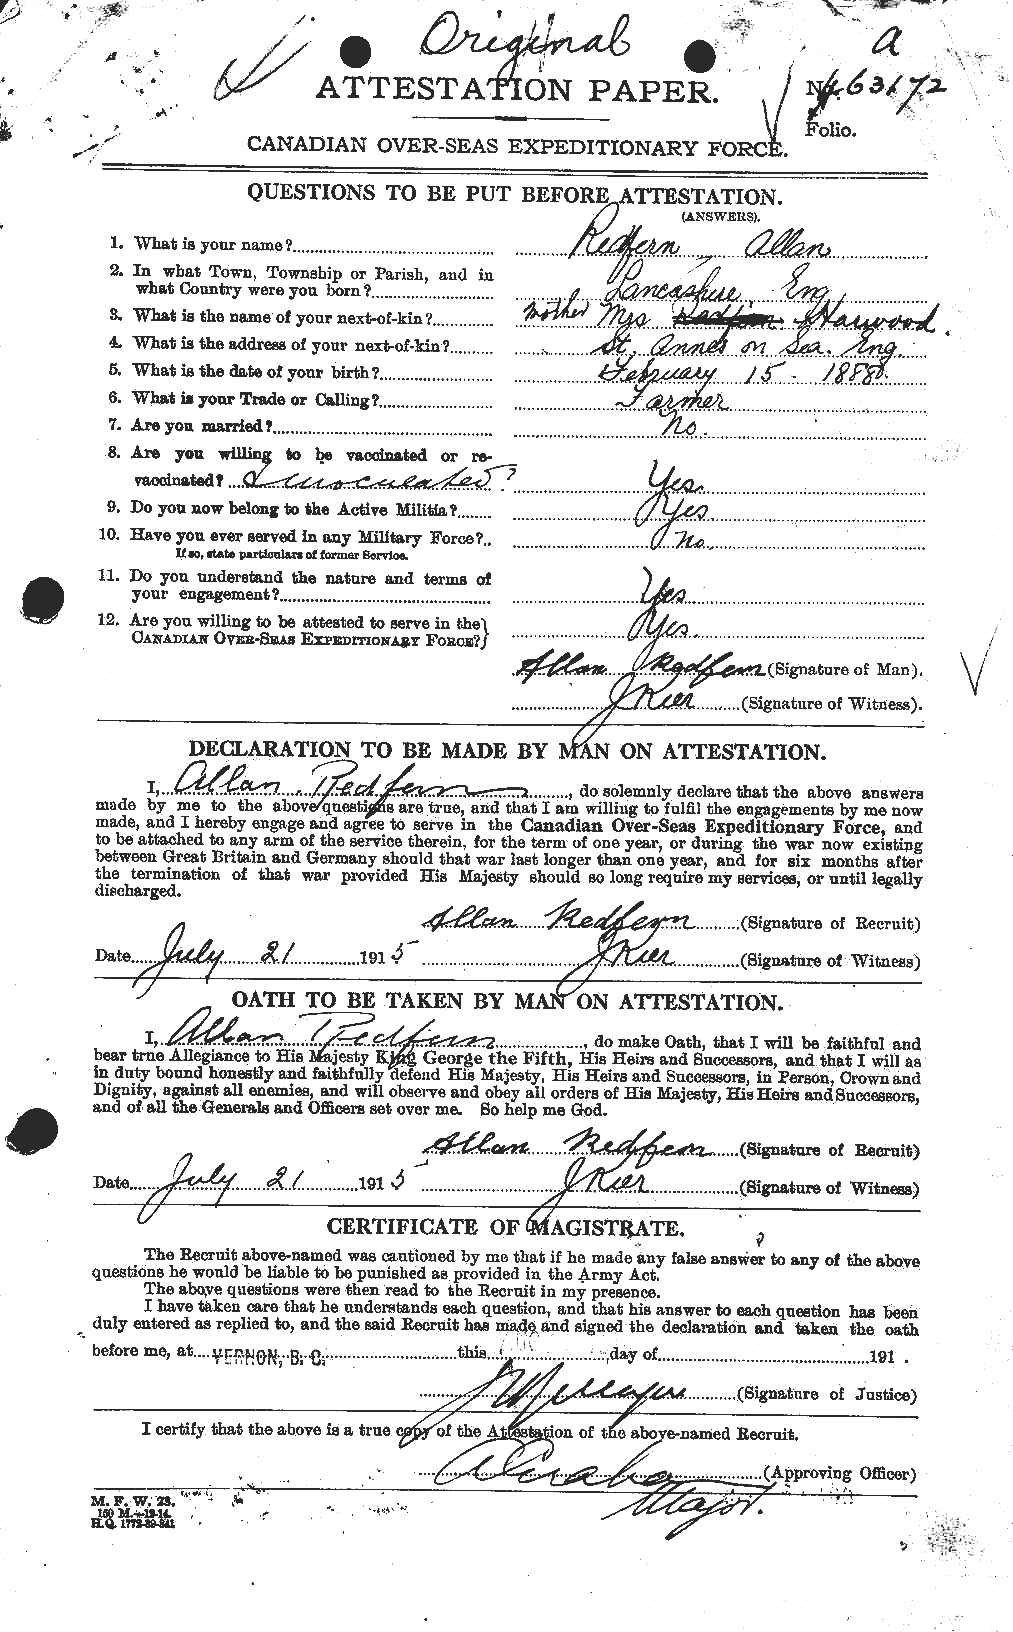 Personnel Records of the First World War - CEF 595926a